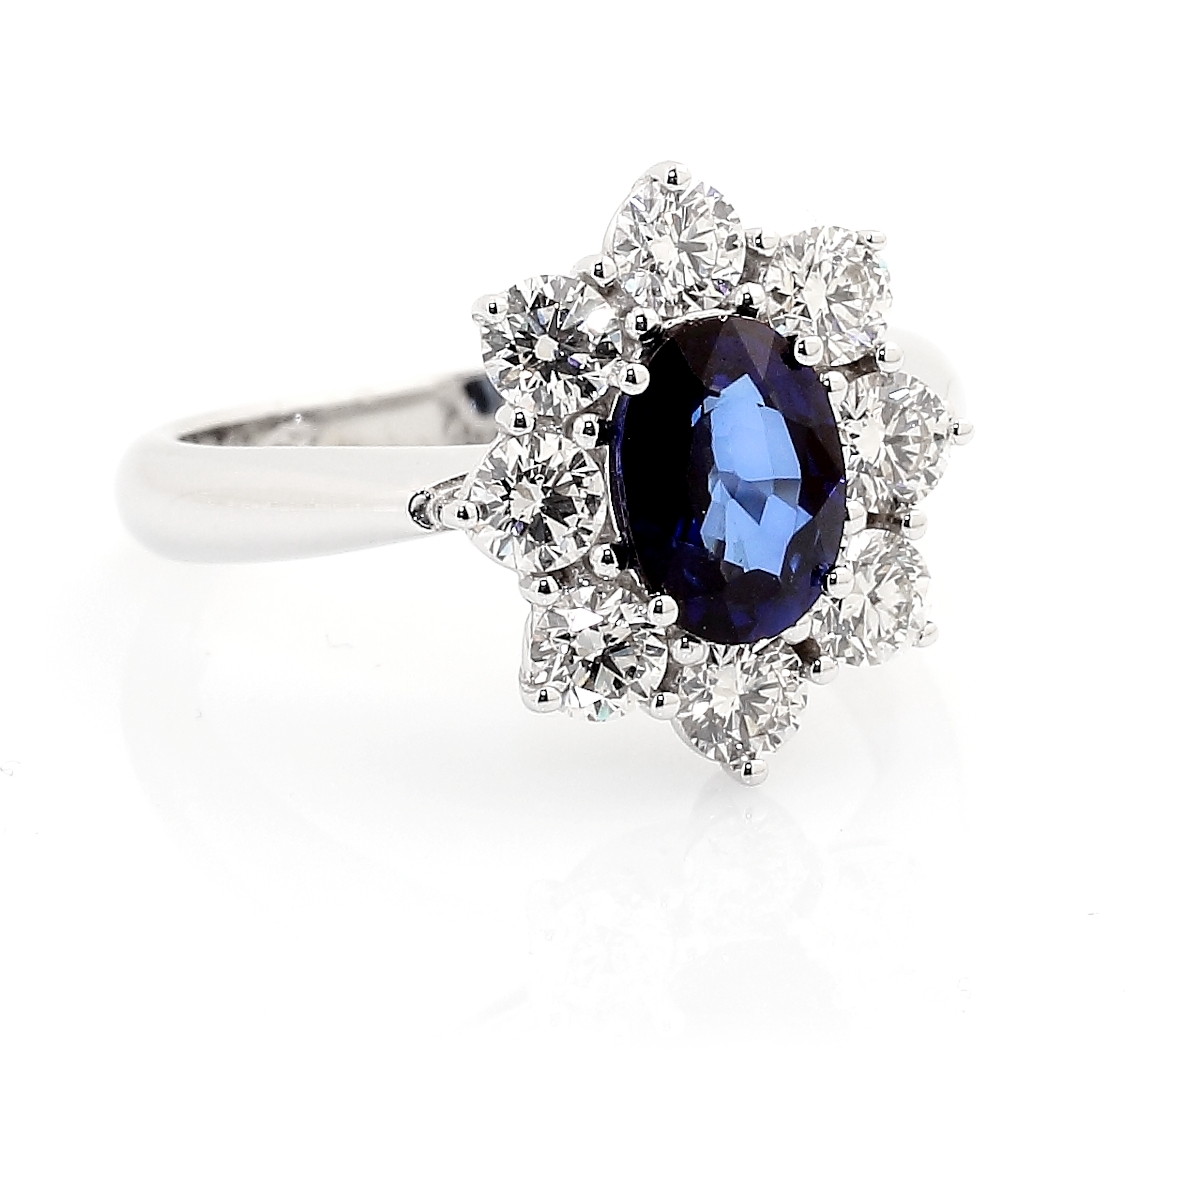 750 Mill. White Gold Ring with 1,00 Ct. Diamonds and 1,04 Ct. Sapphire